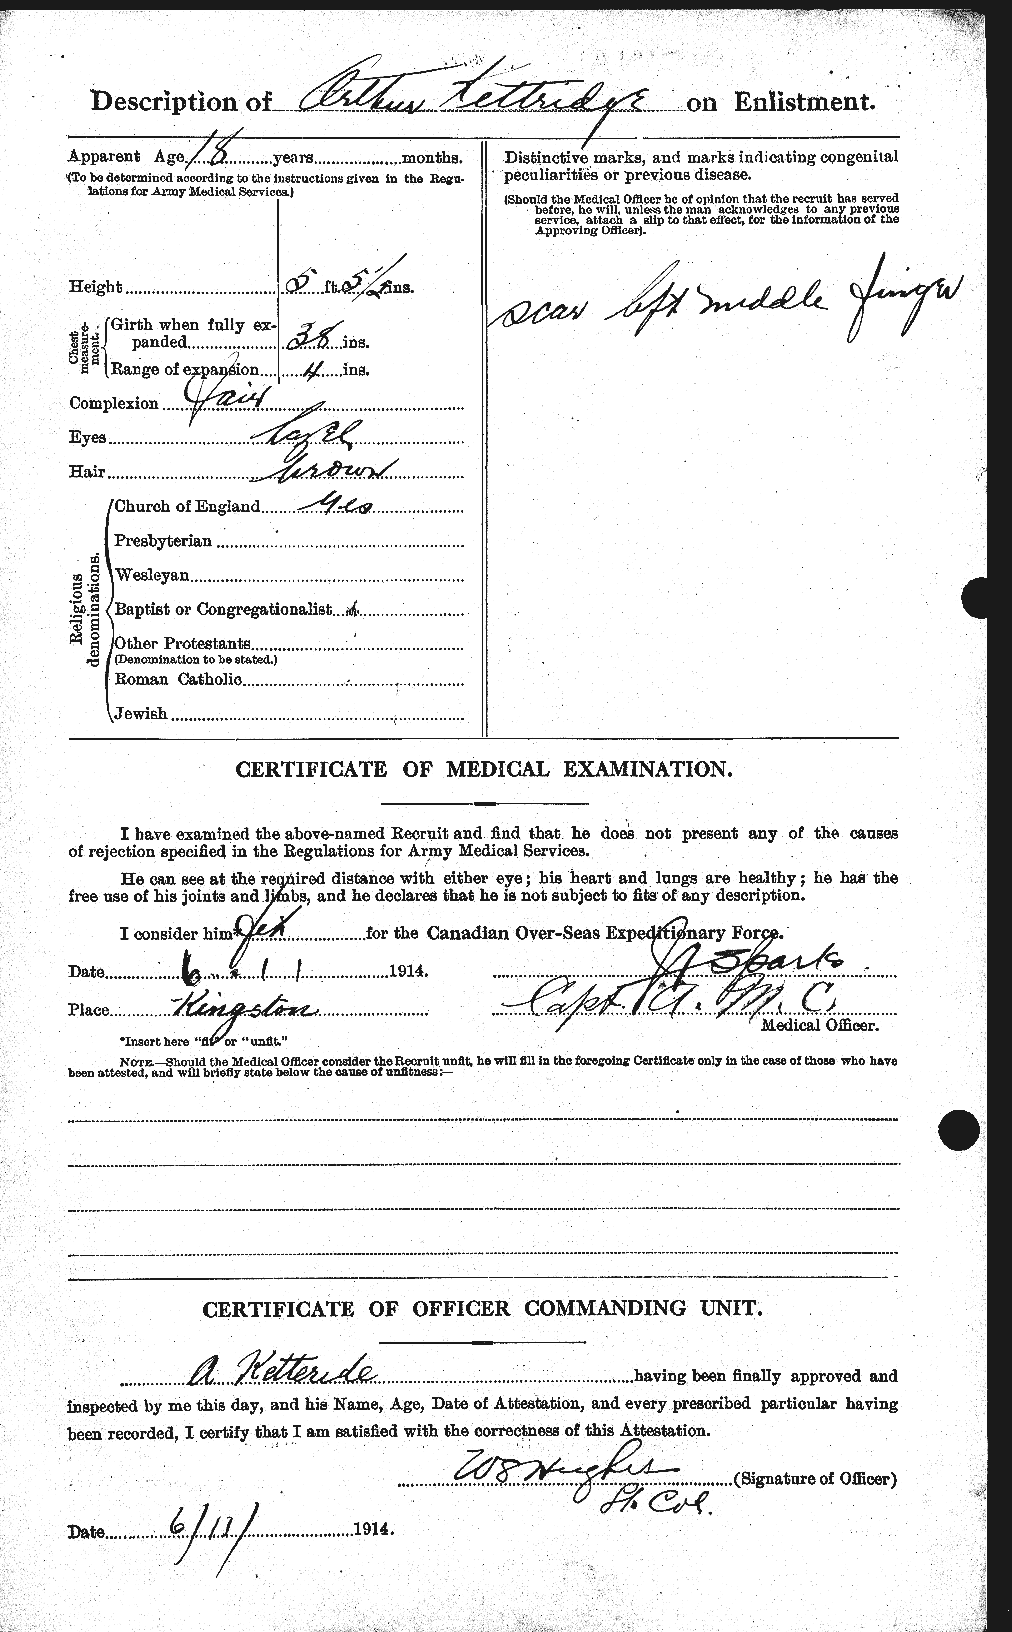 Personnel Records of the First World War - CEF 436419b